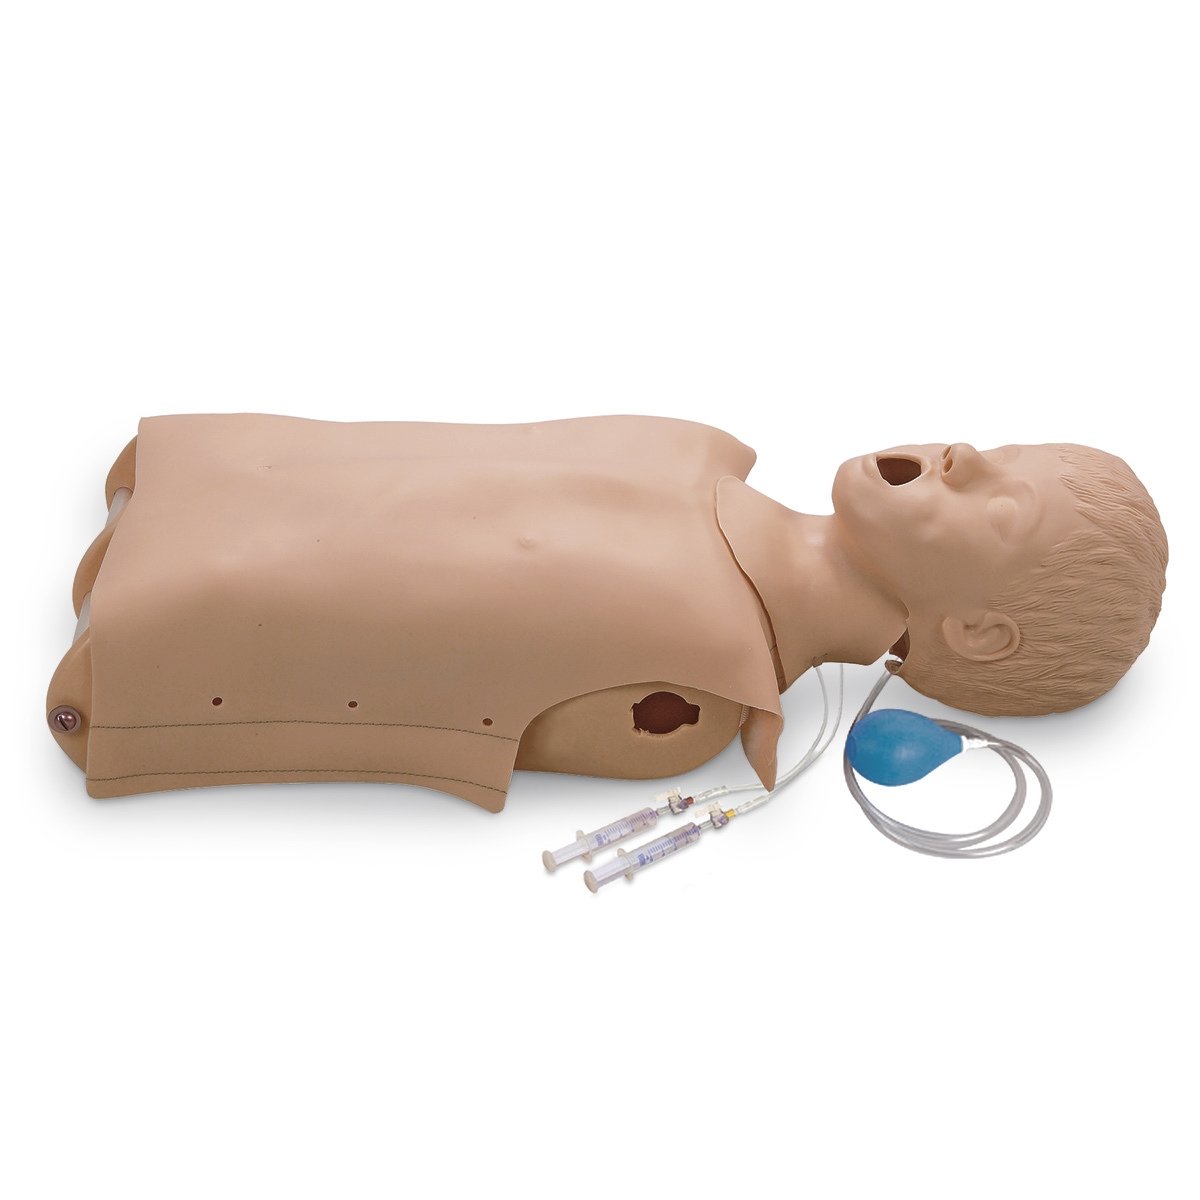 Life/form Basic Child CRiSis Trainer Torso with Advanced Airway Management